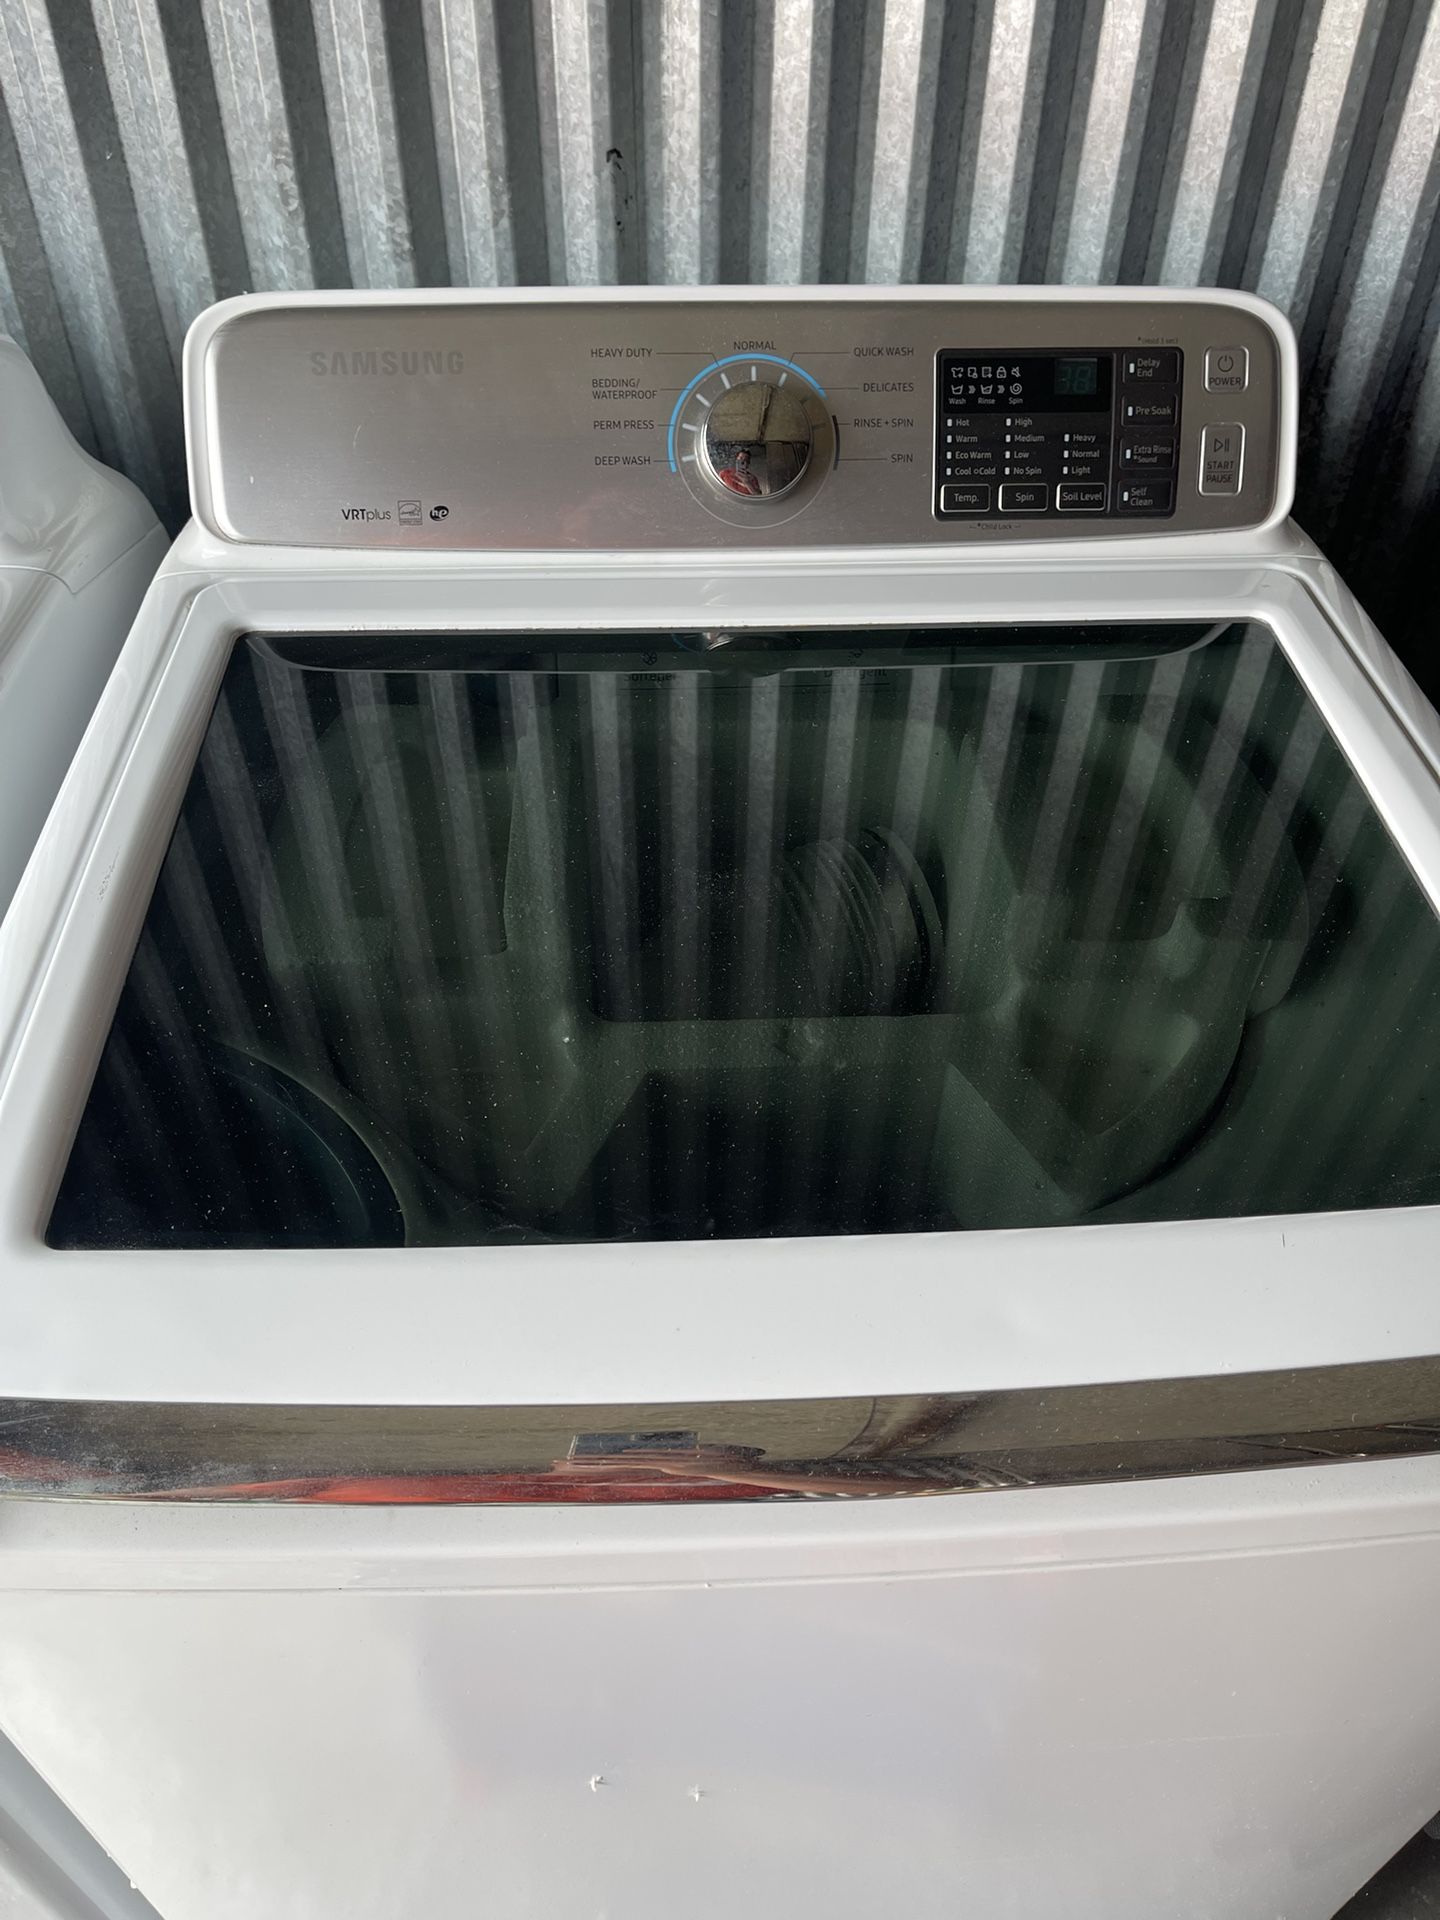 Samsung washer and dryer with only a month of use are like new